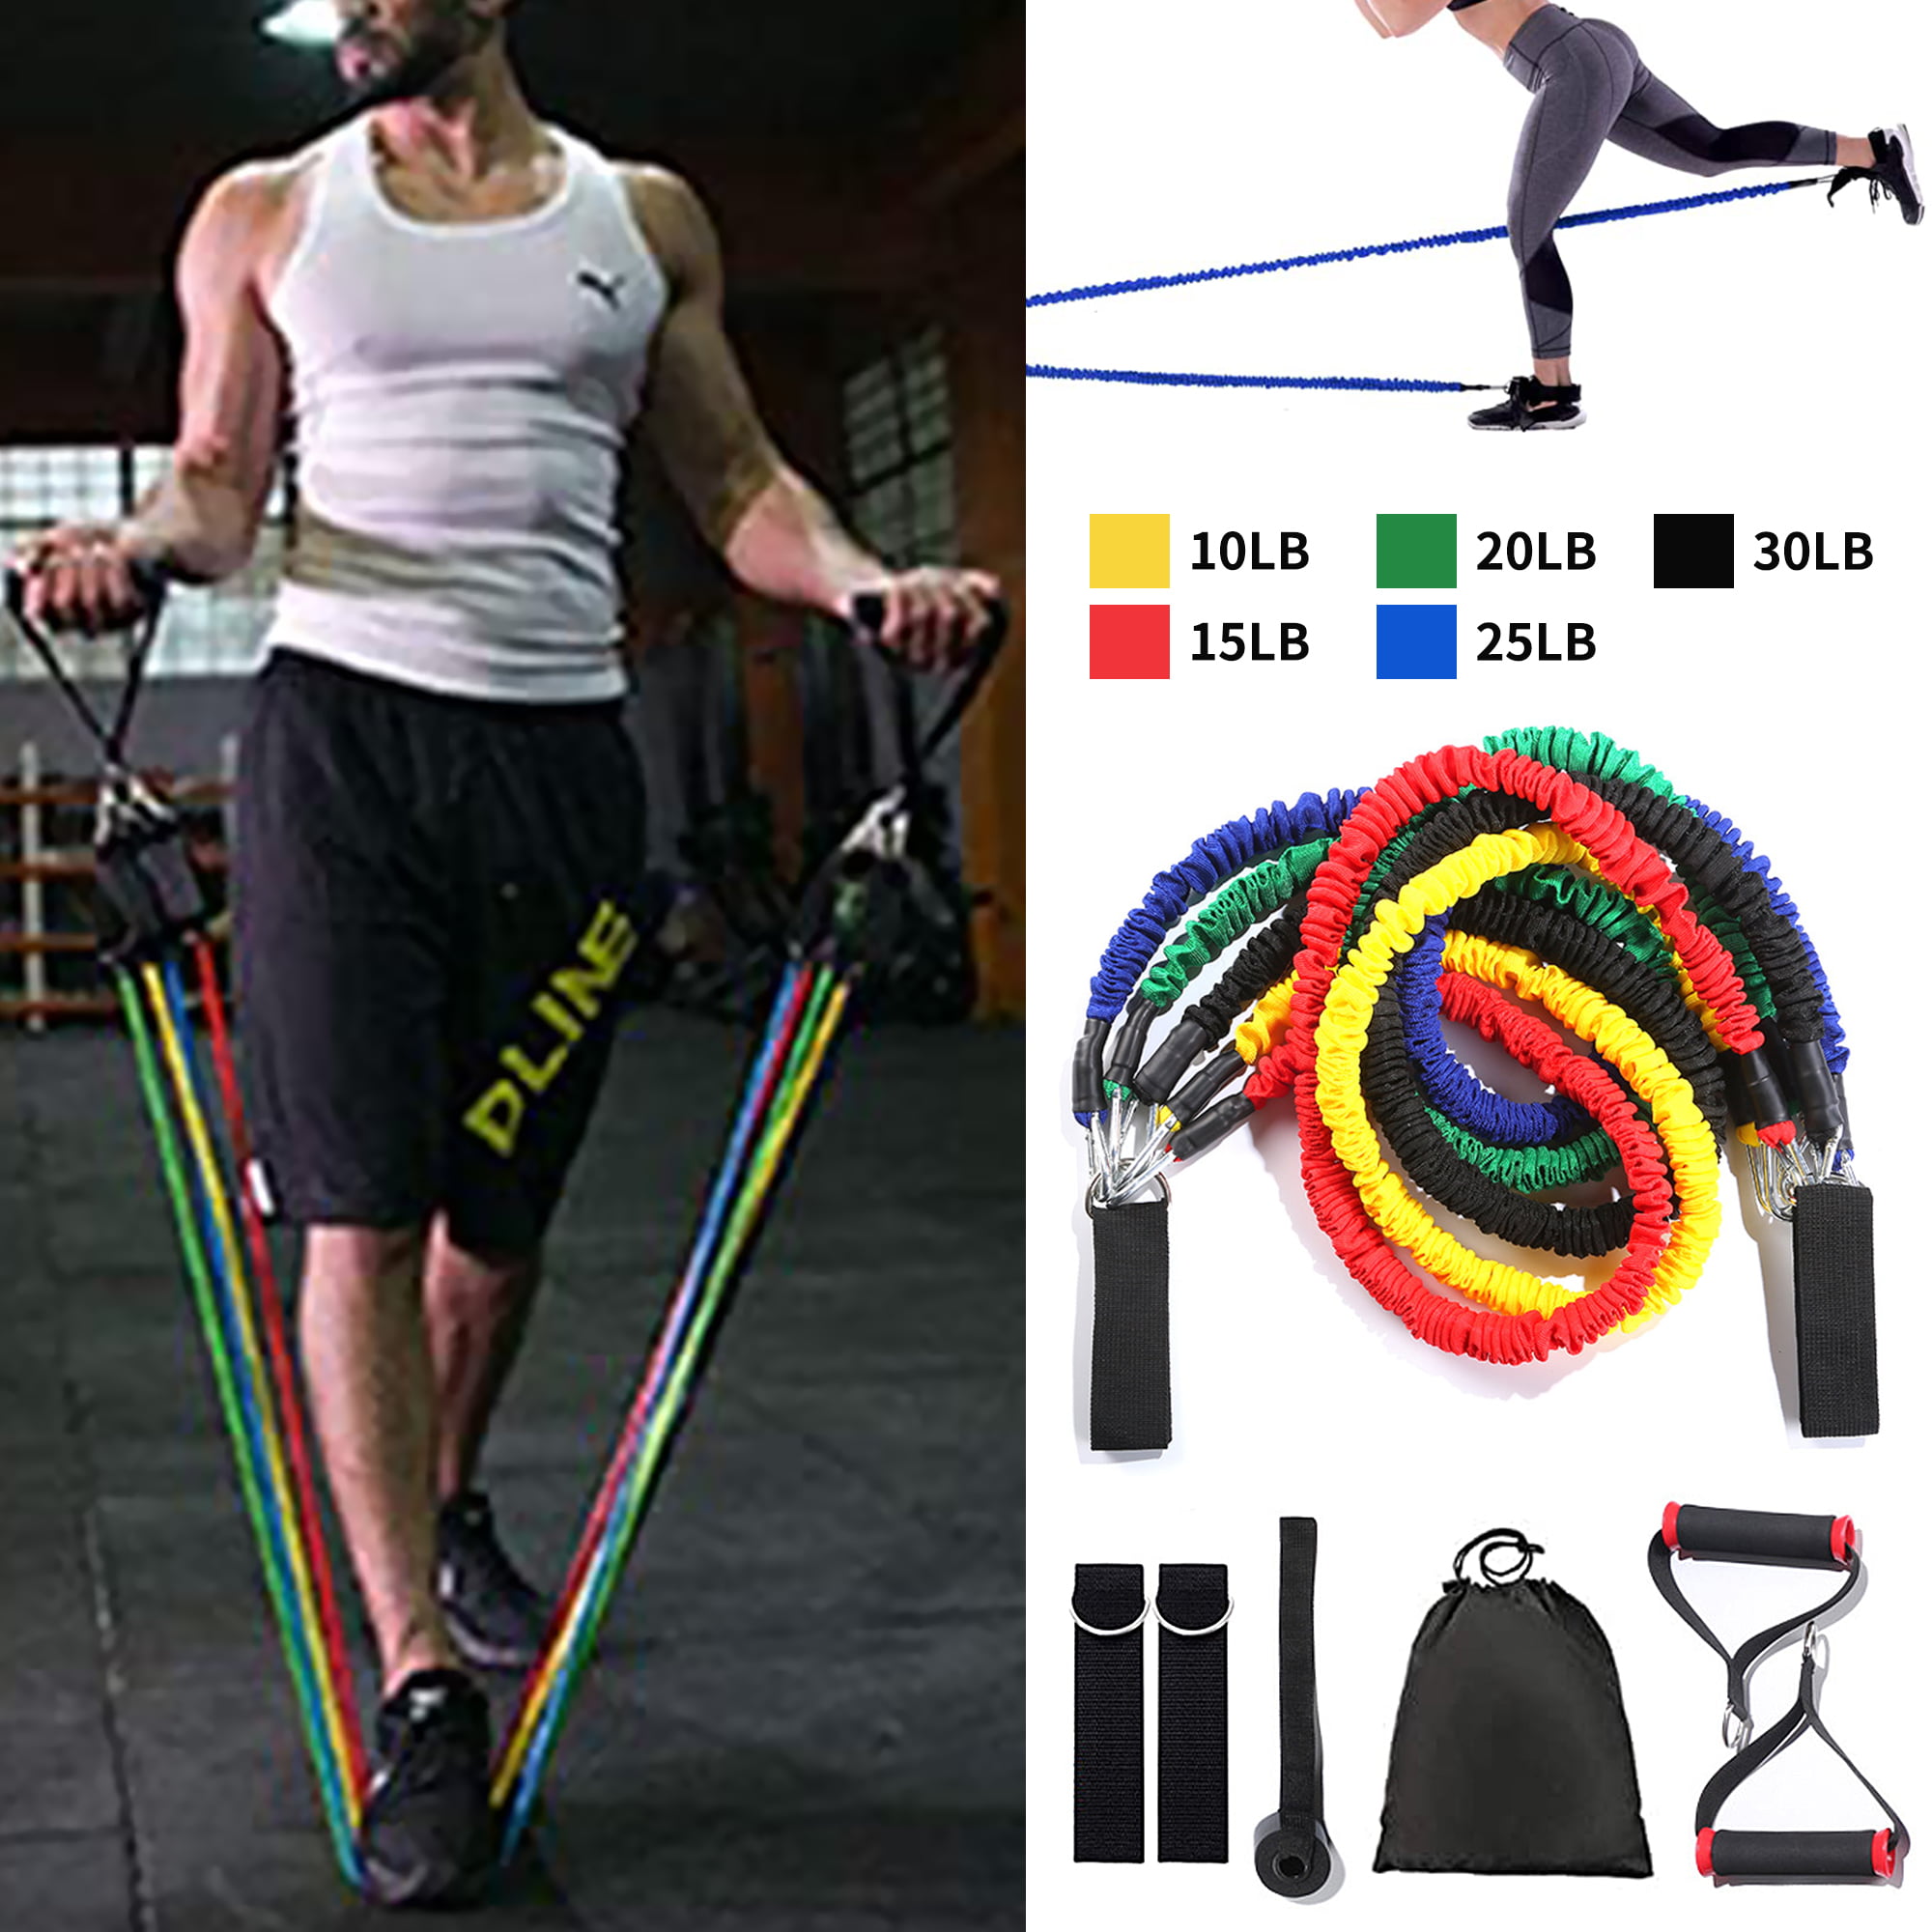 2x Exercise Handles Grip Resistance Bands Workout Tube Fitness Strength Training 